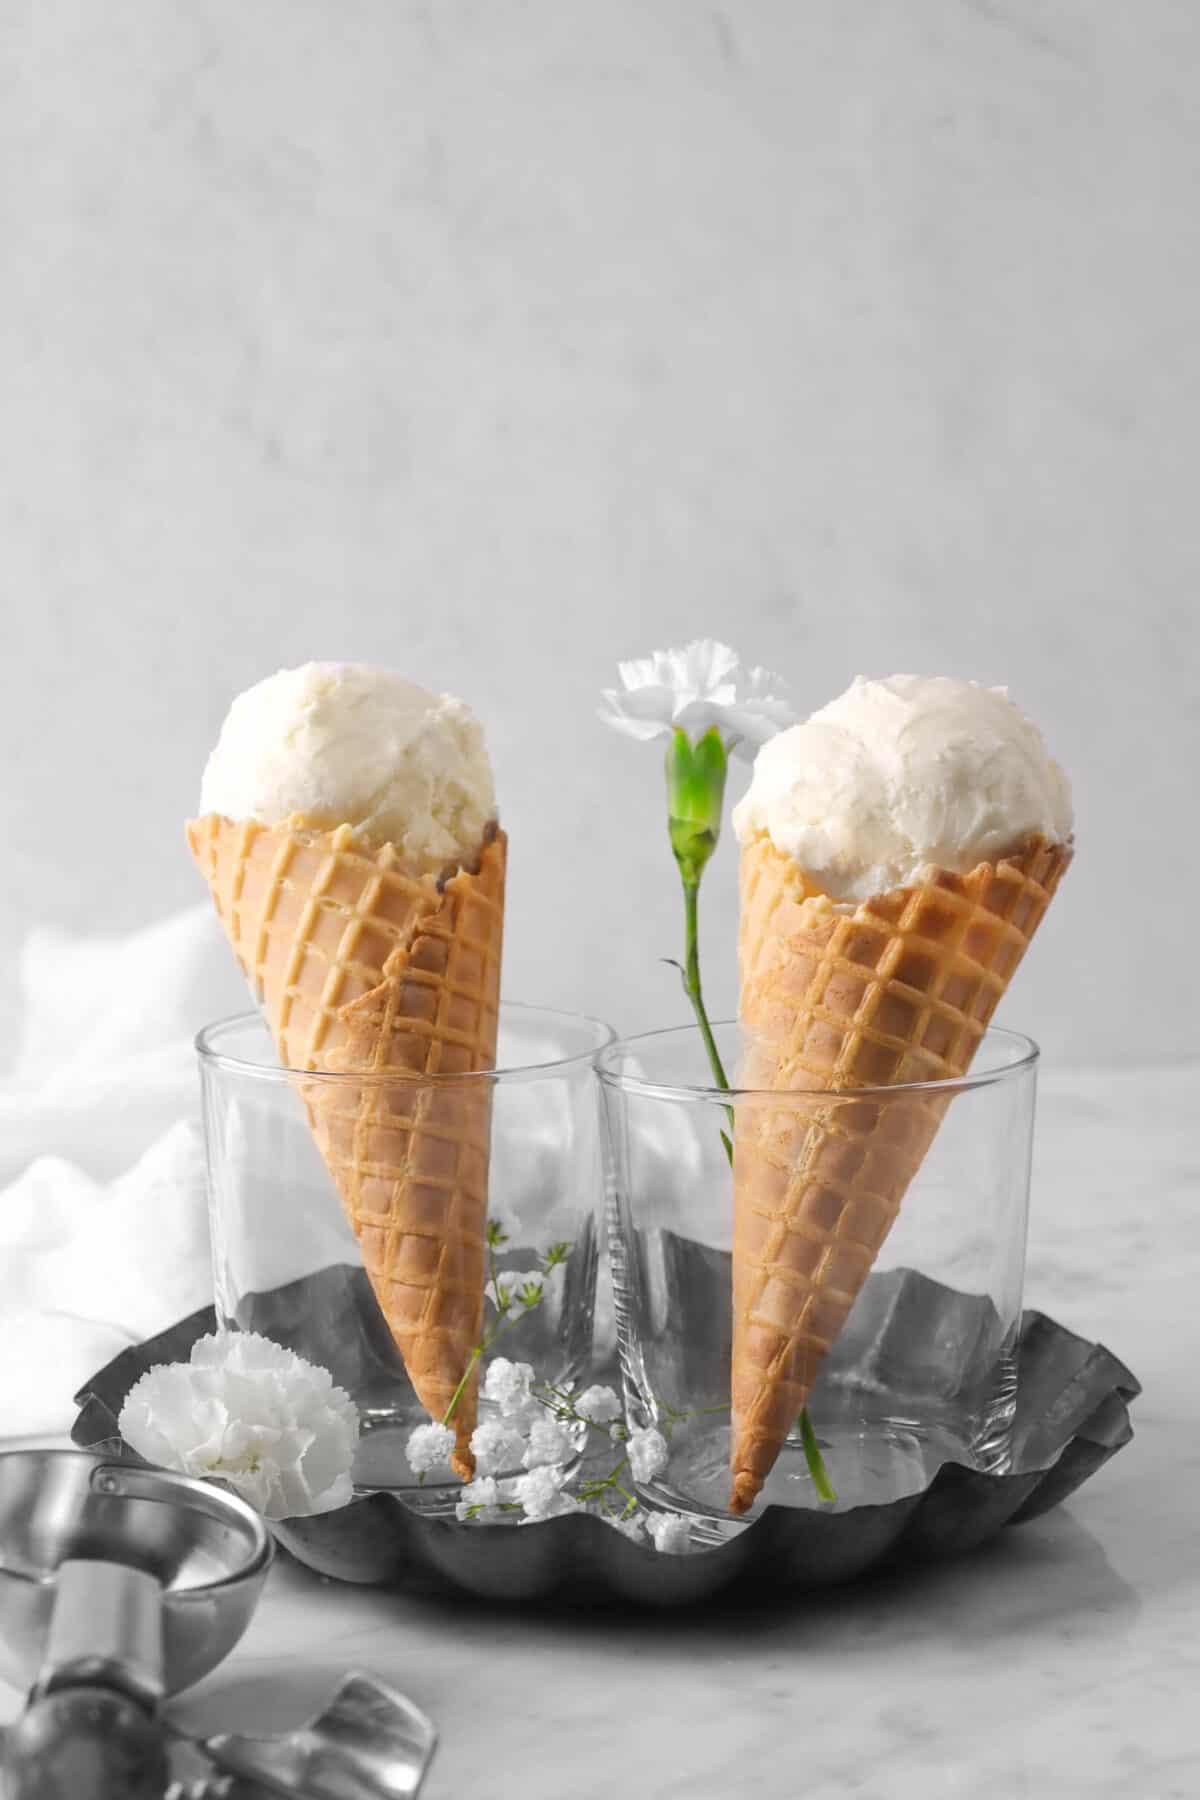 two scoops of vanilla ice cream on two cones with flowers, ice cream scoop, on a pie pan, with napkin